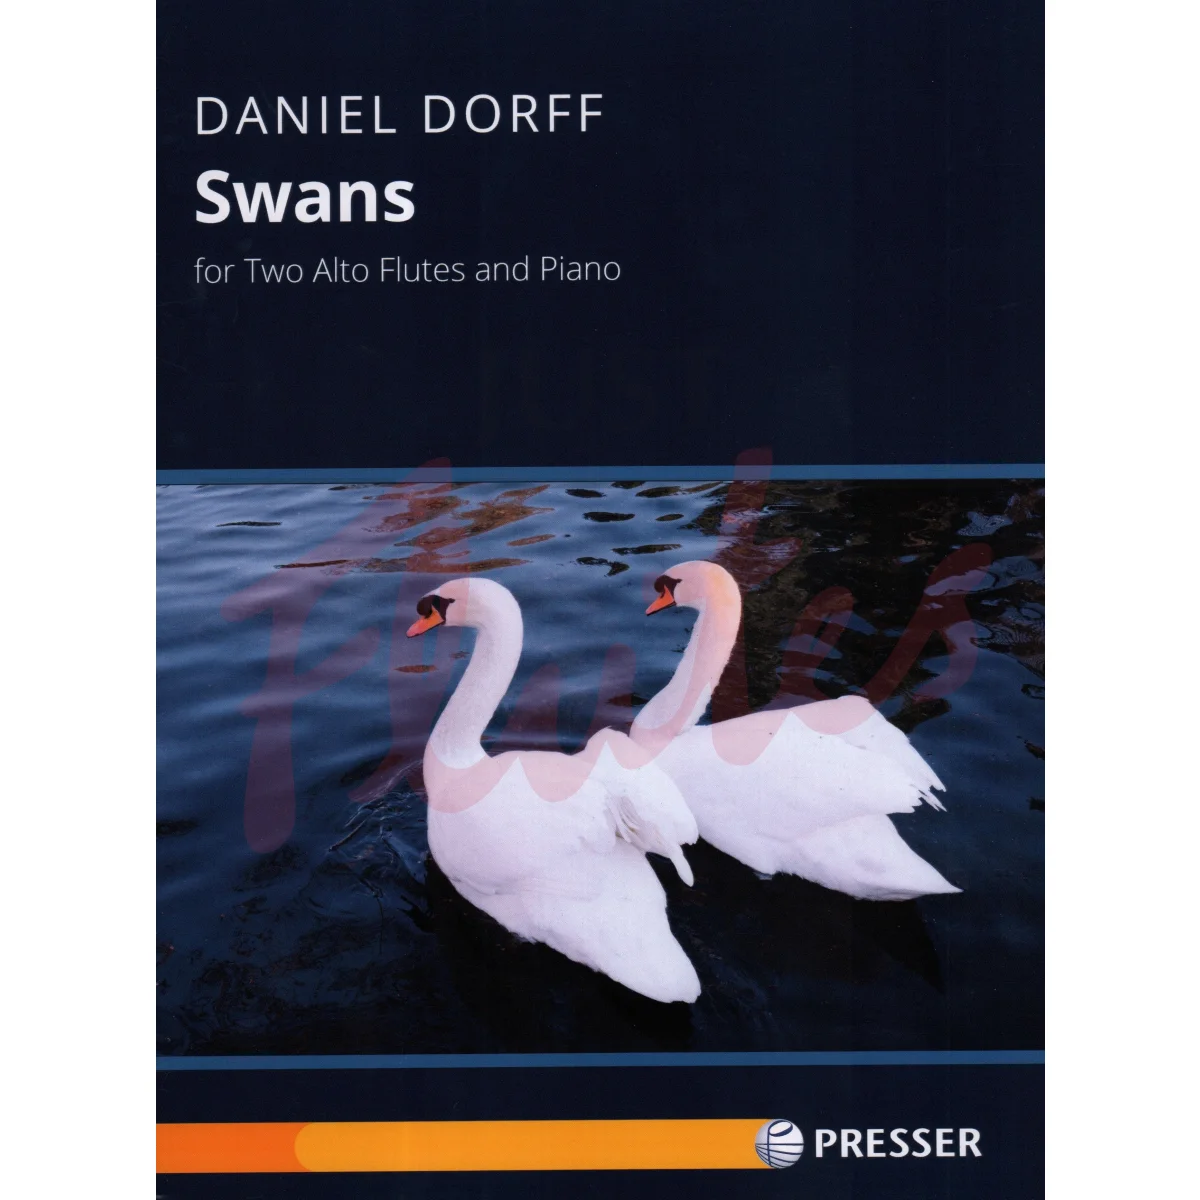 Swans for Two Alto Flutes and Piano